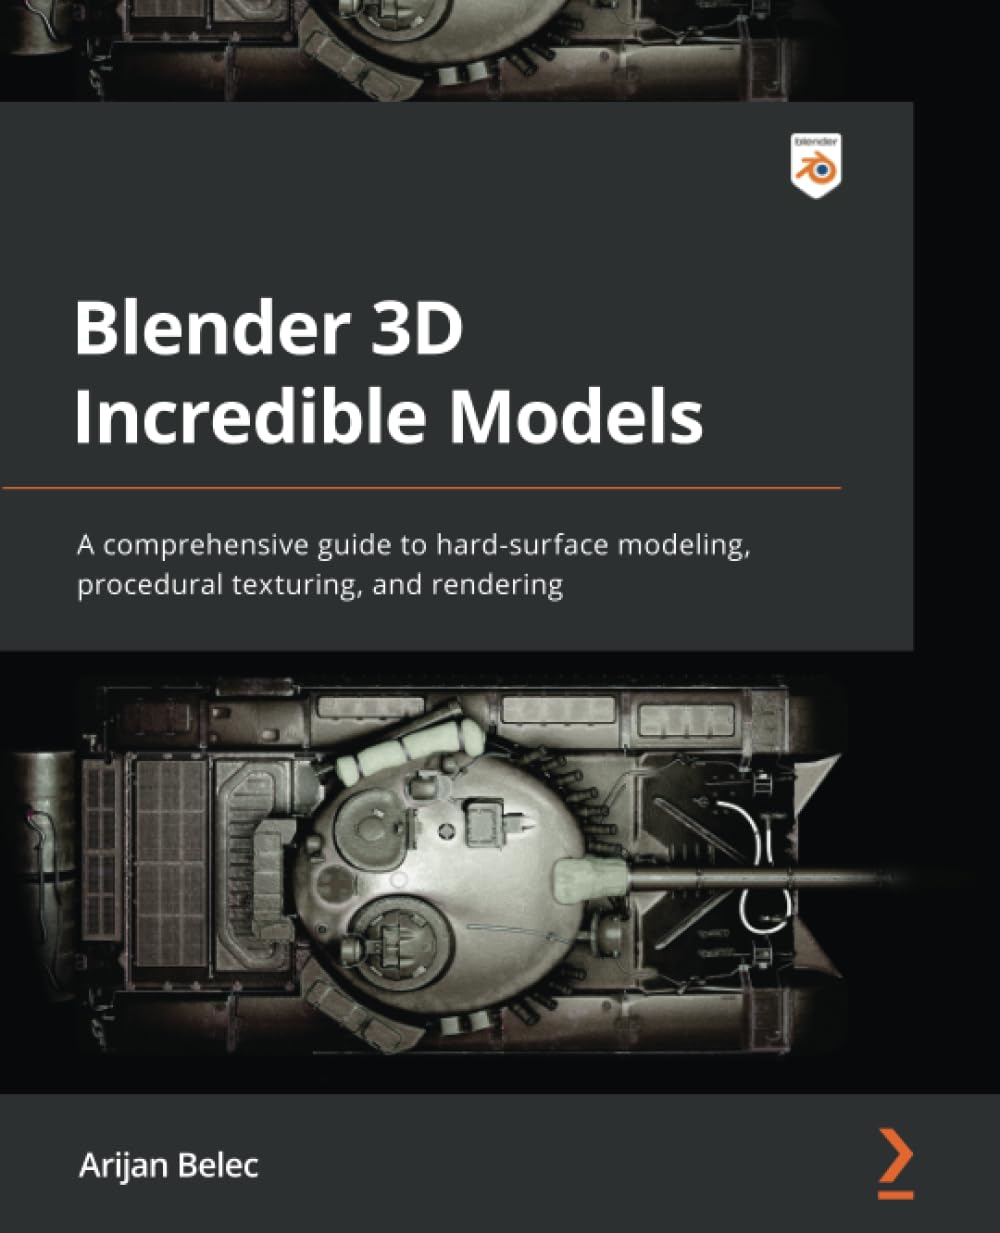 Blender 3D Incredible Models: A comprehensive guide to hard-surface modeling, procedural texturing, and rendering by Arijan Belec